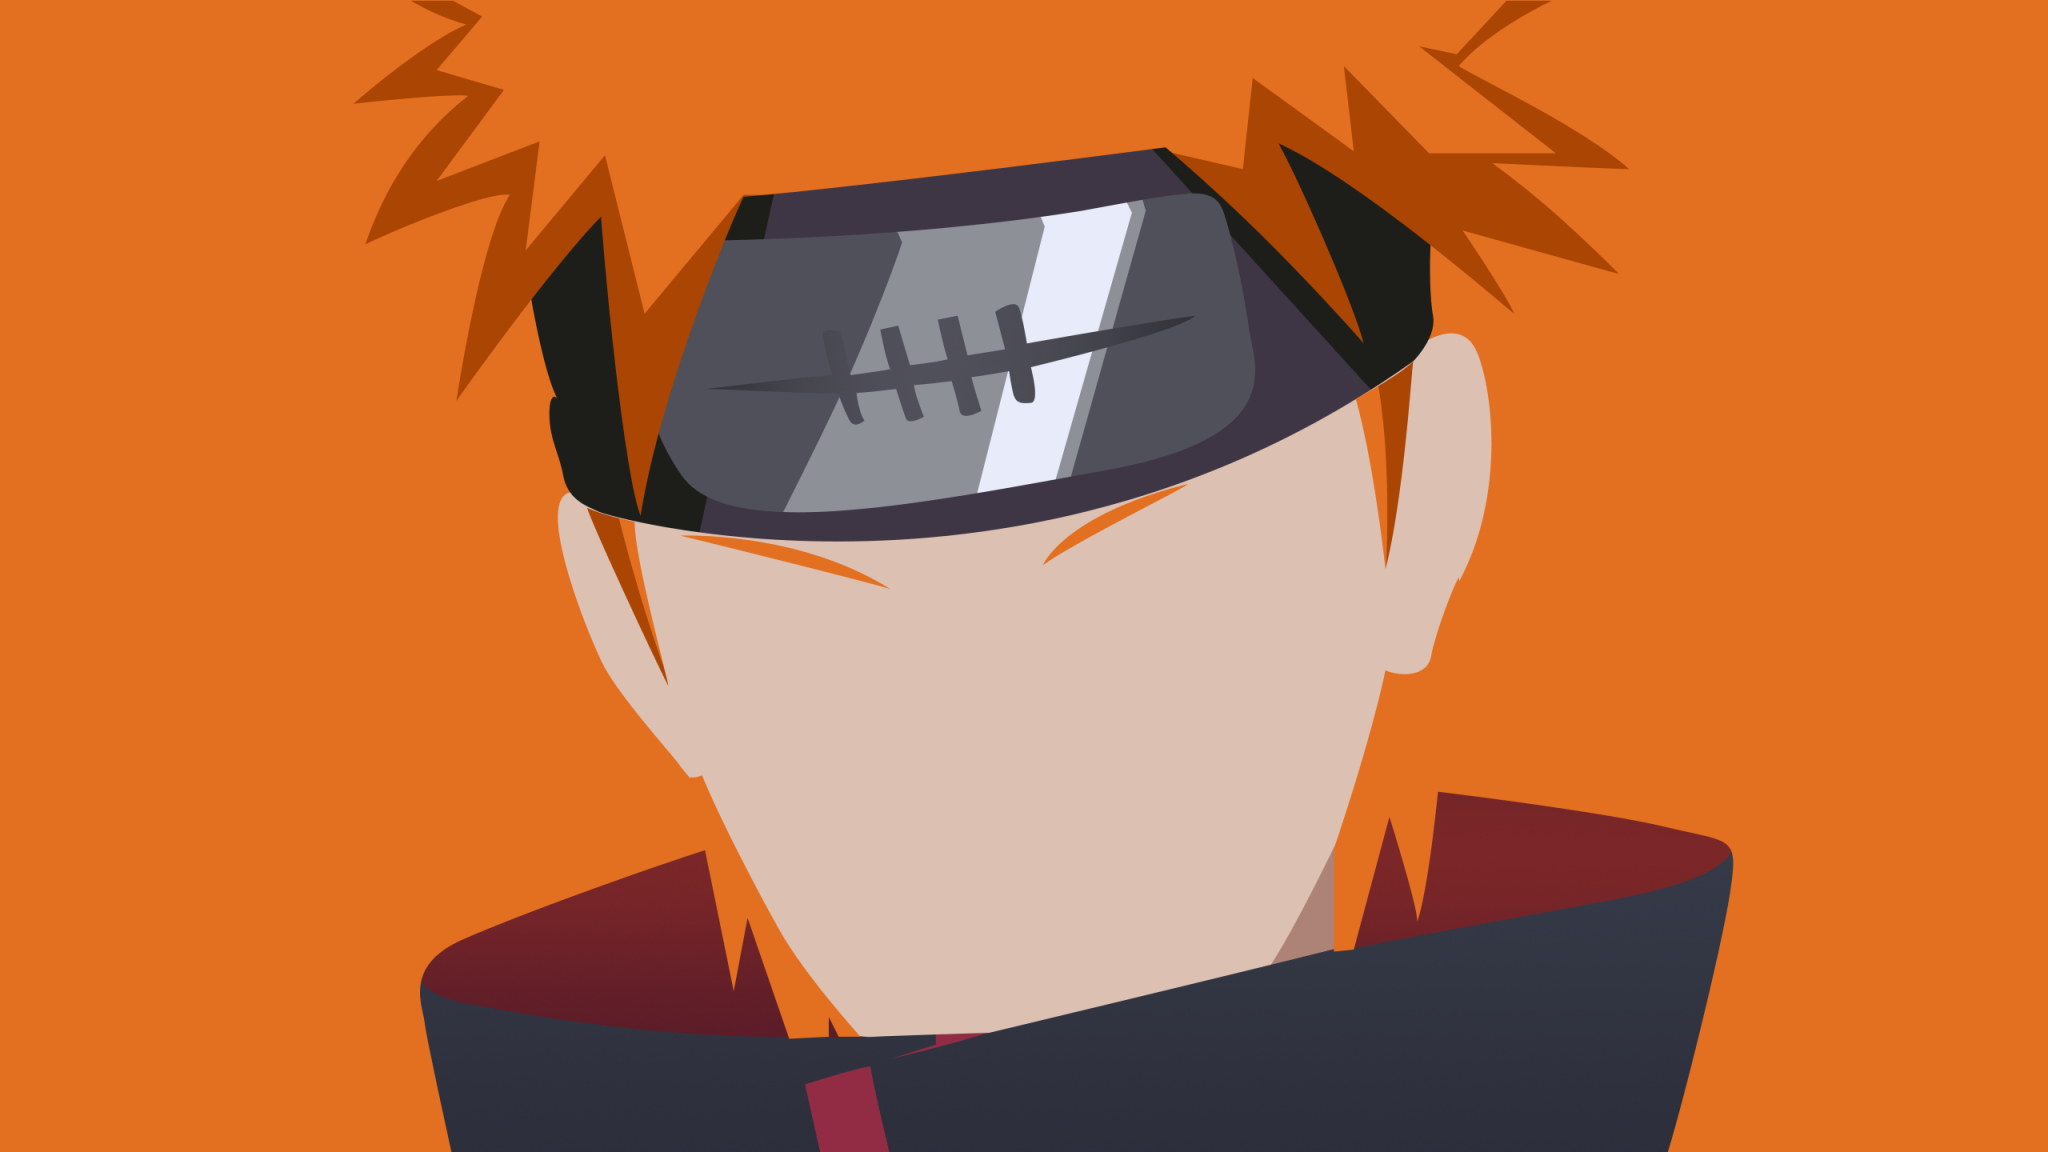 48x1152 Pain Naruto 48x1152 Resolution Wallpaper Hd Anime 4k Wallpapers Images Photos And Background Wallpapers Den